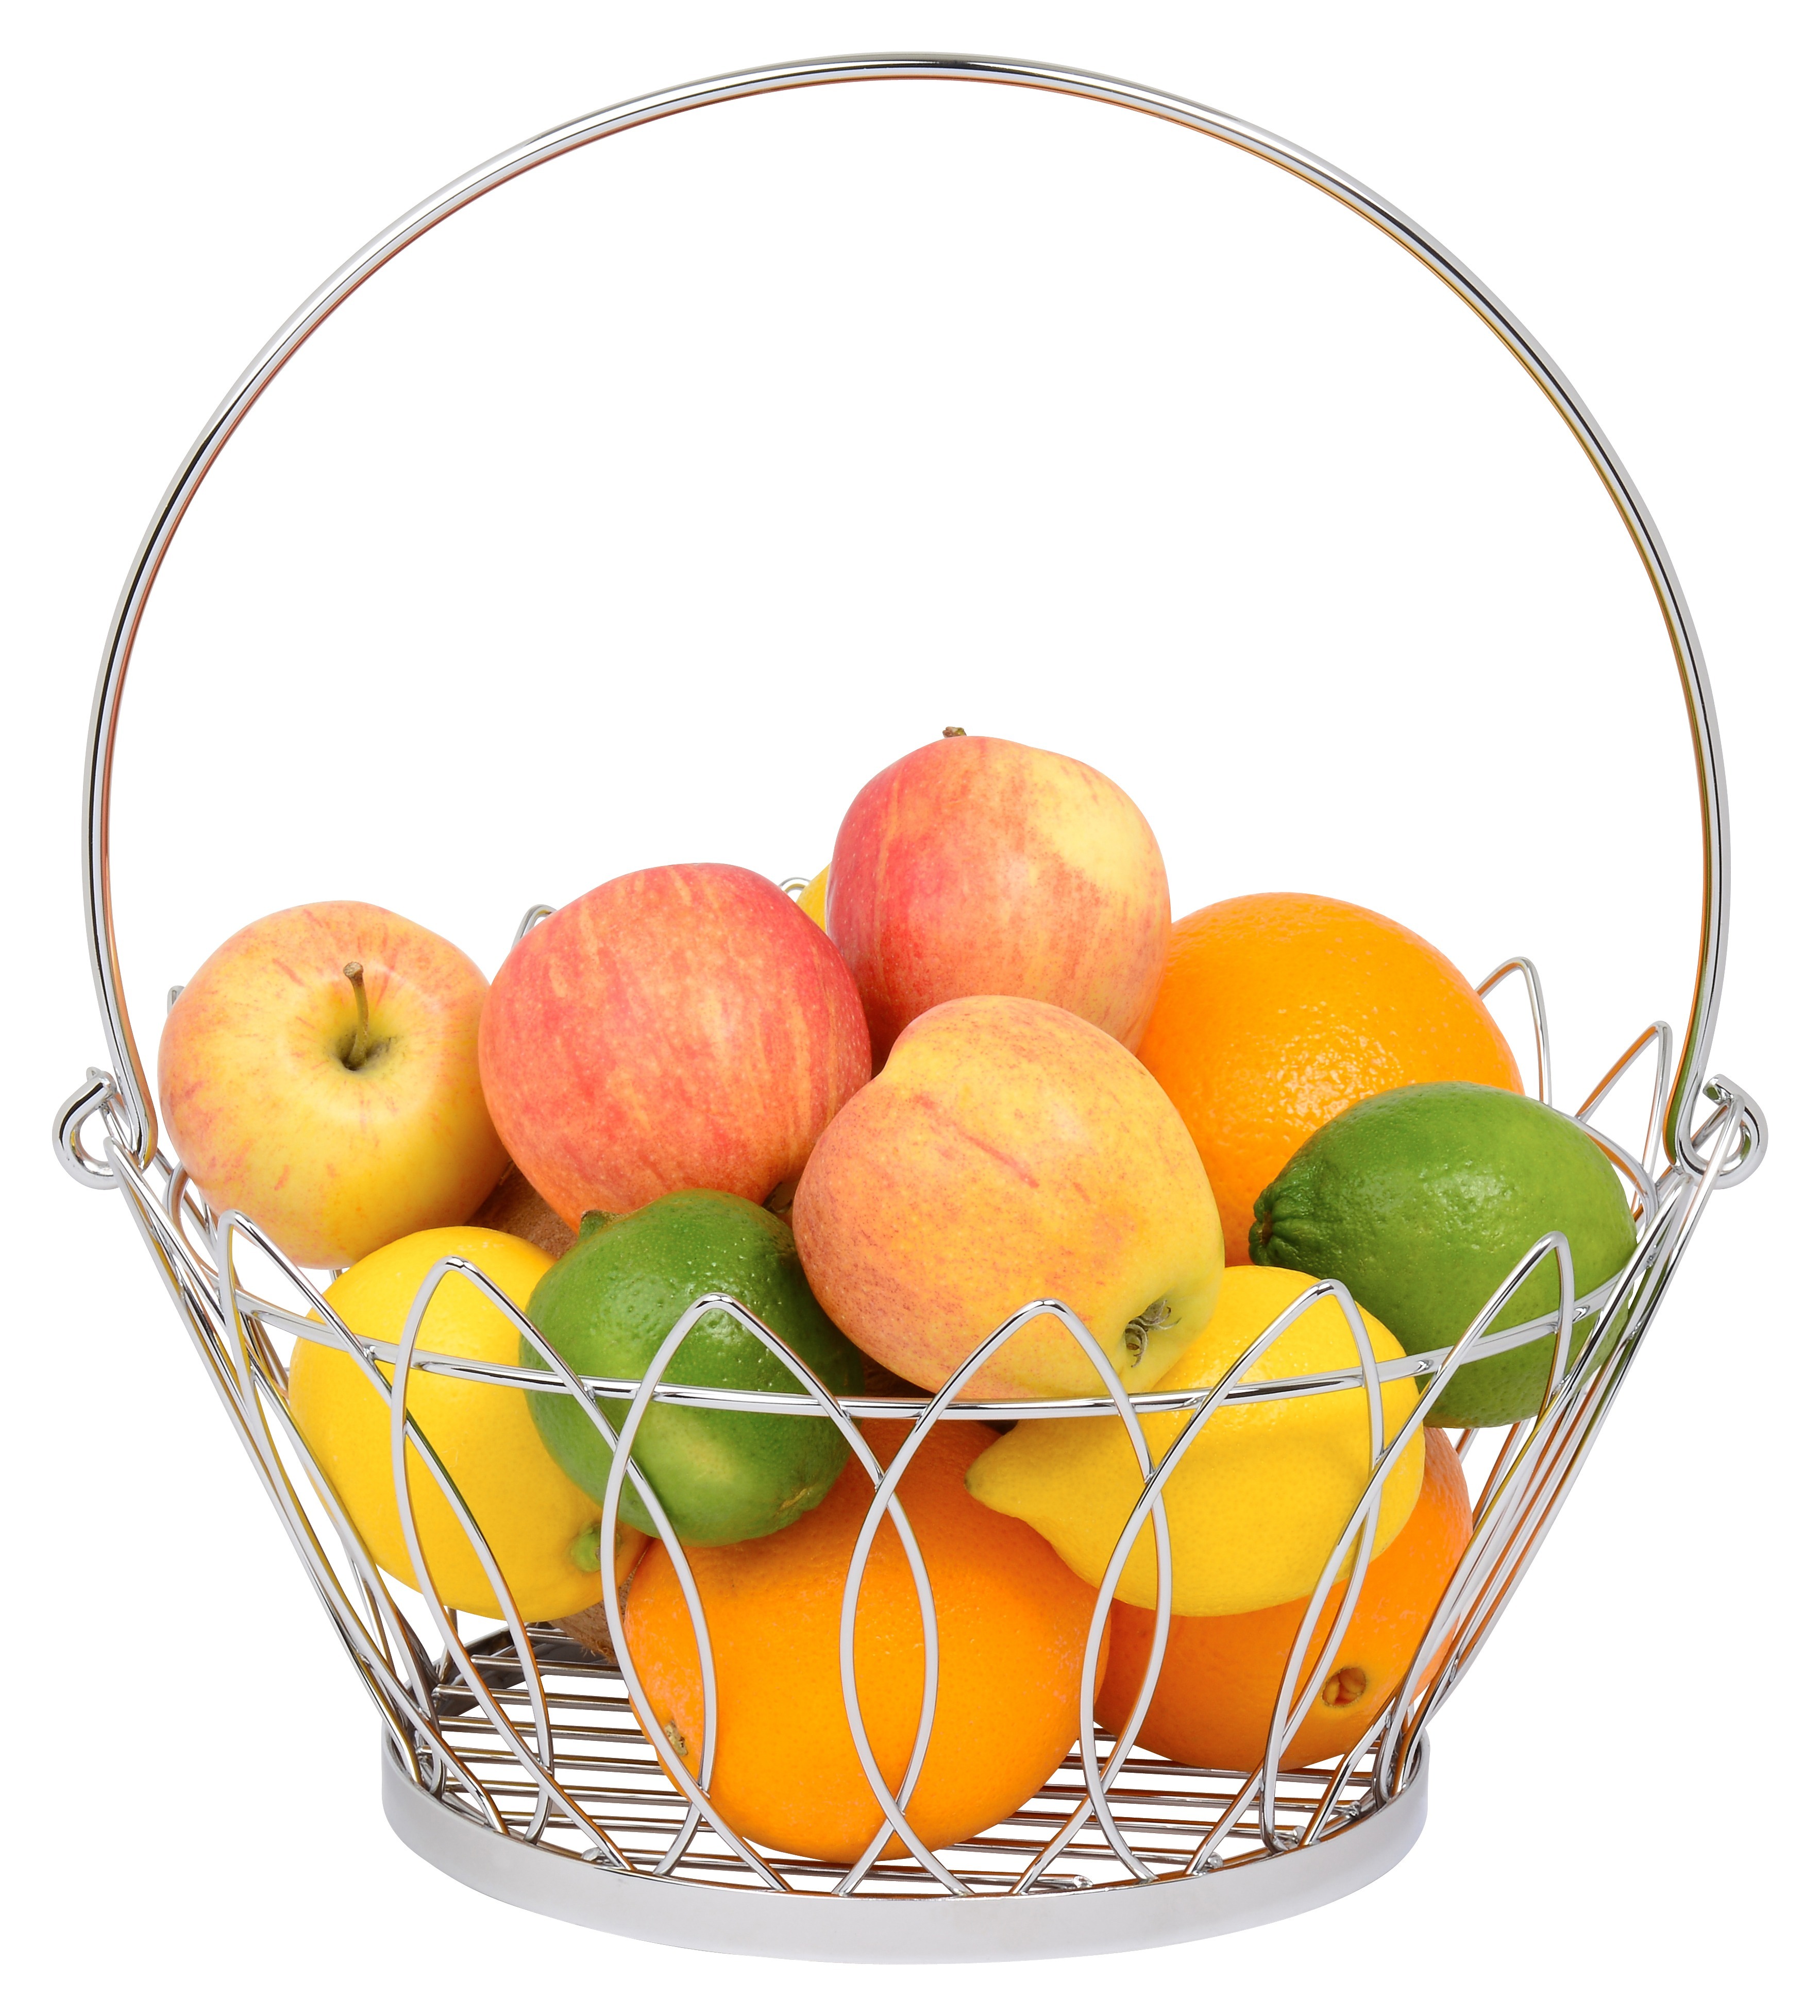 Fruit Bowl - High Quality Stainless Steel with Shiny Chrome Polish